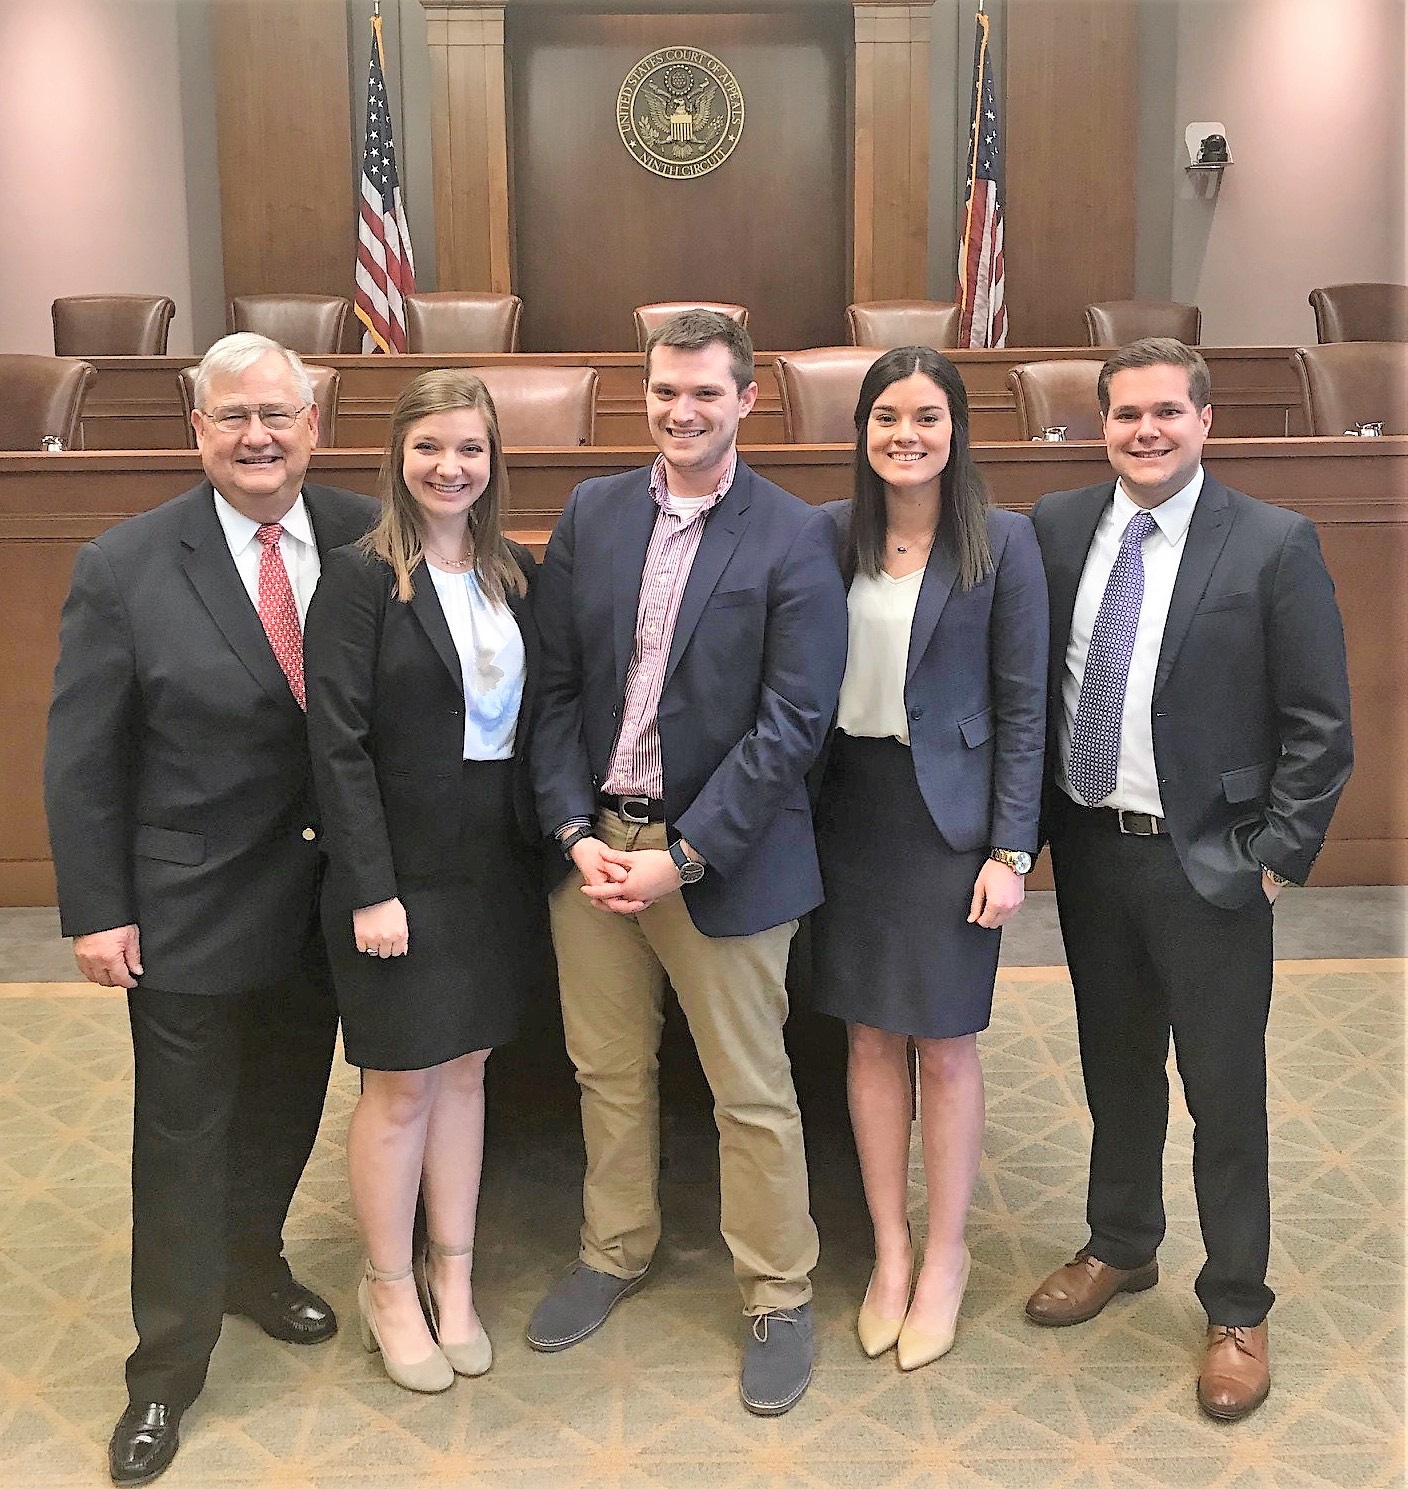 LSU Law students Max Roberts, left, and Zach Miller and were crowned champions of the Manfred Lachs Space Law Moot Court Competition’s North American regional rounds in Washington, D.C